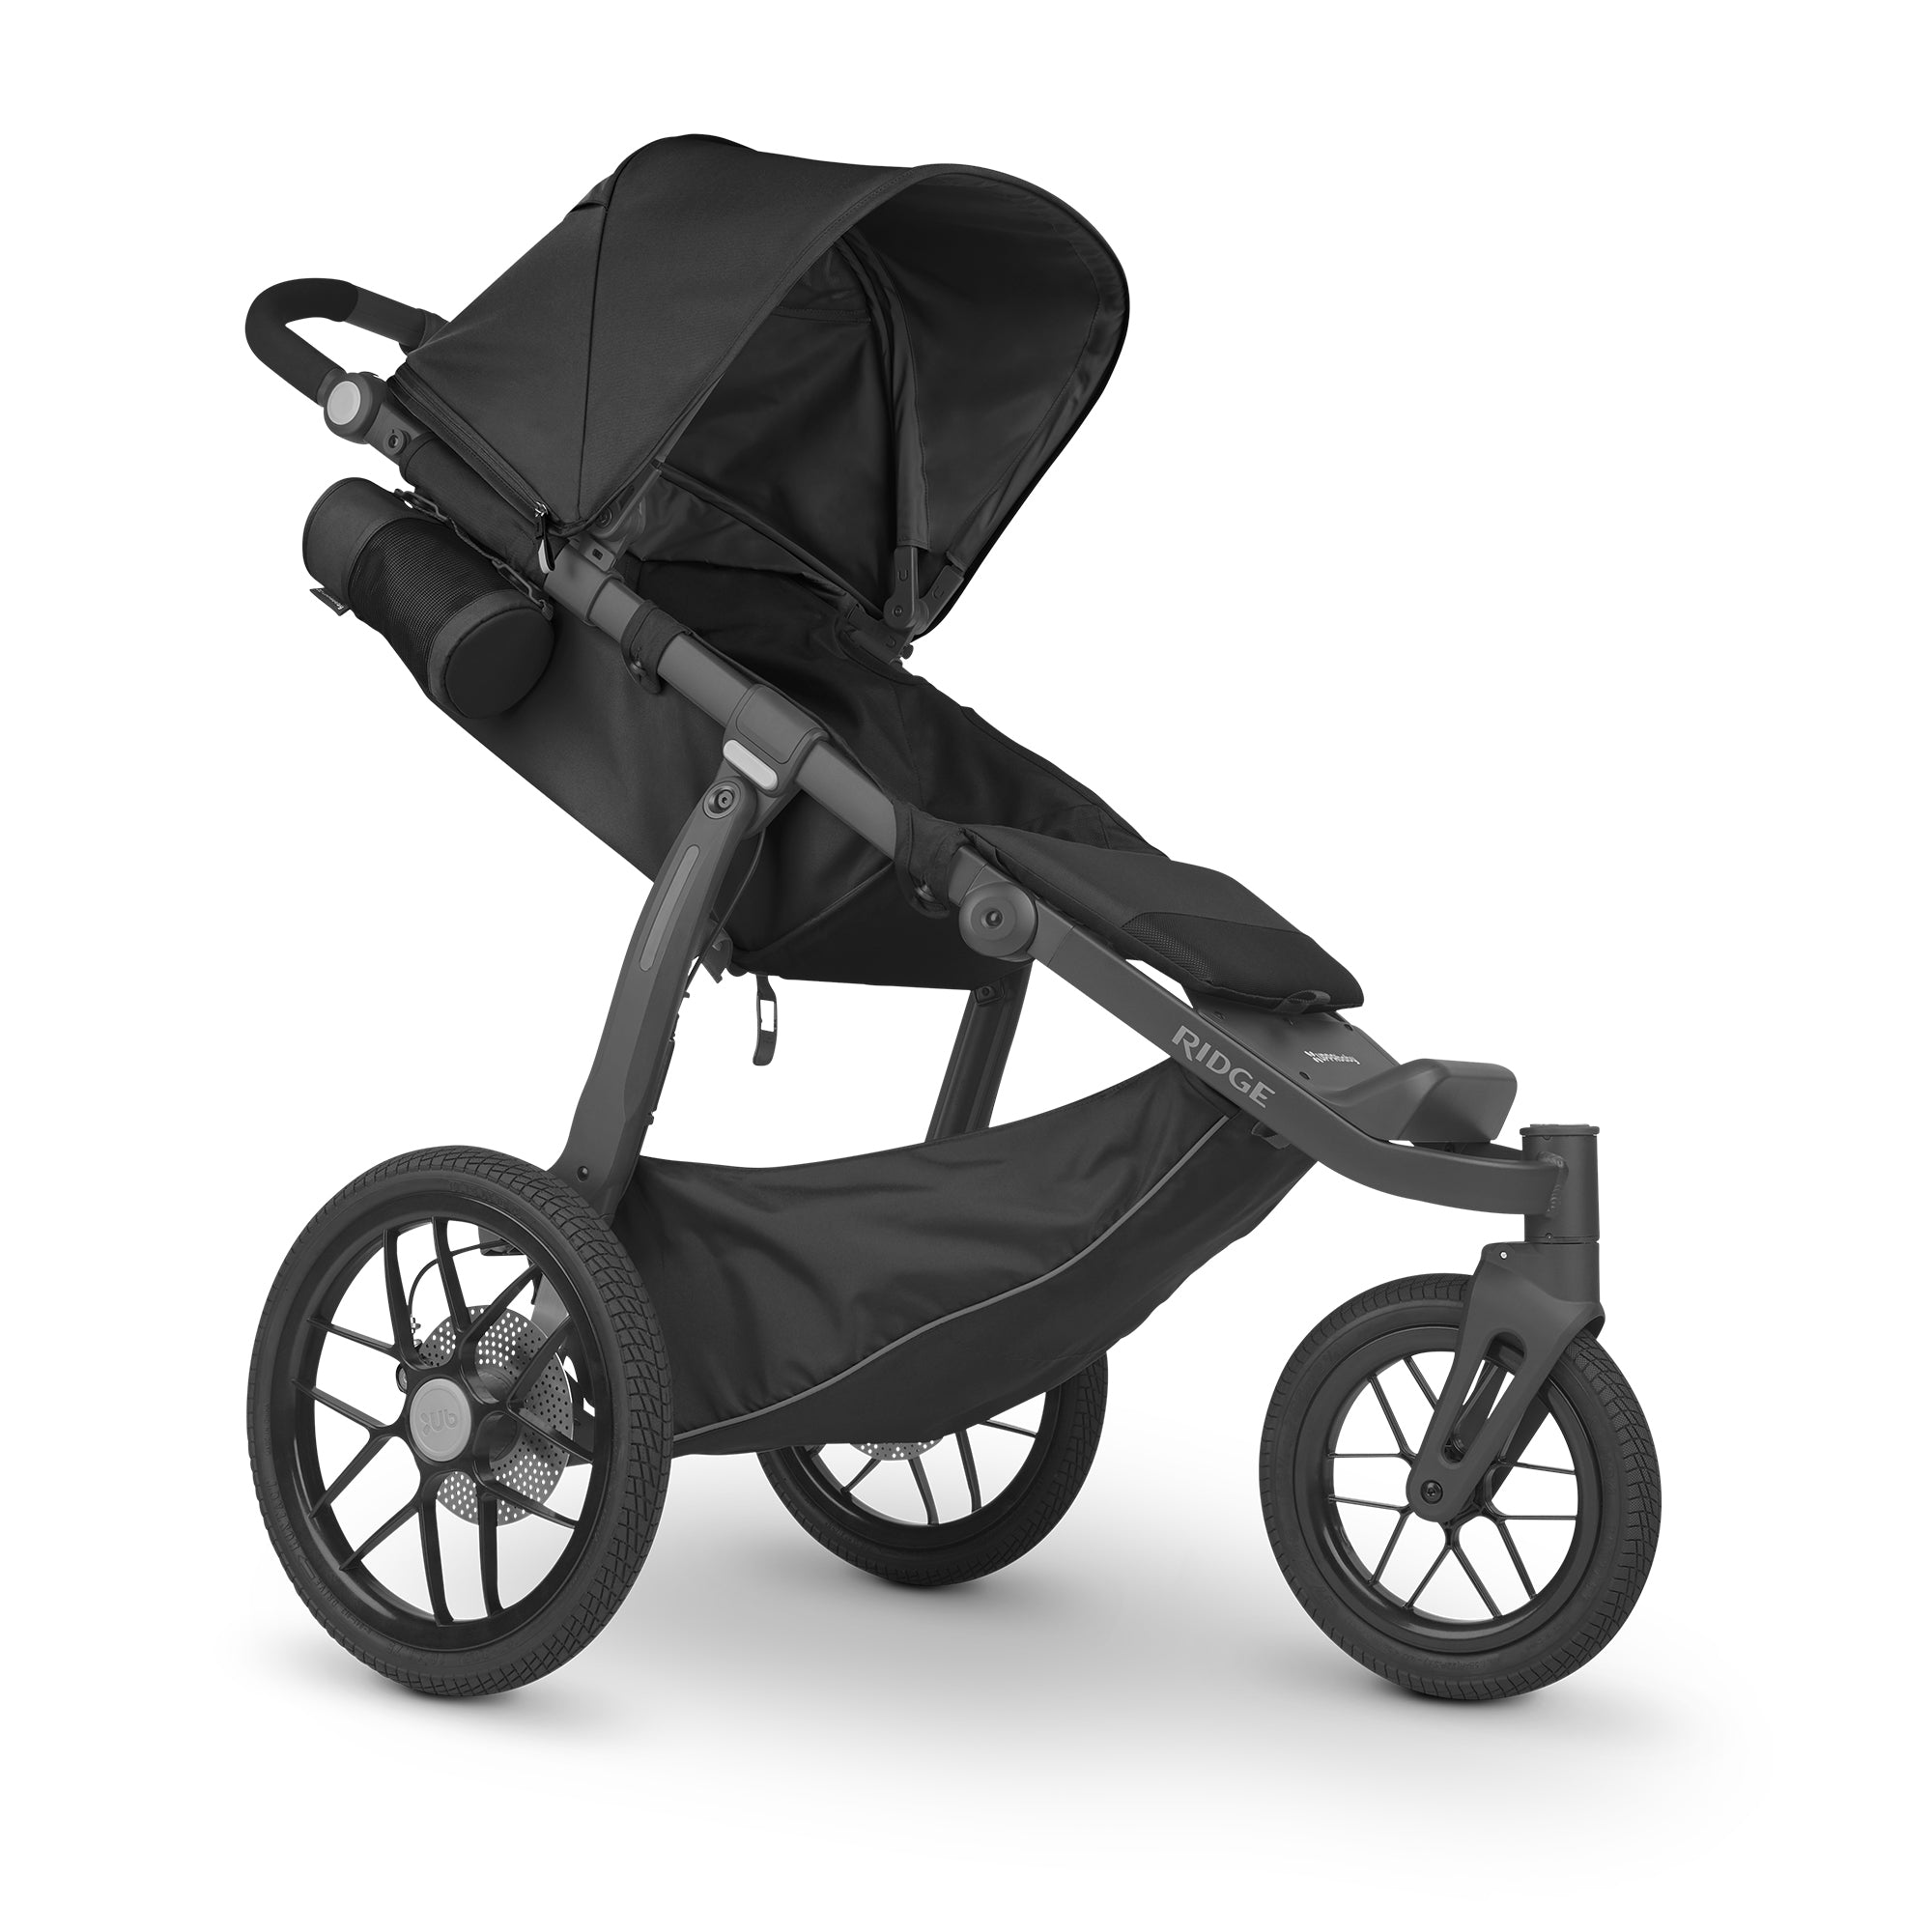 UPPAbaby RIDGE All-Terrain Stroller - Jake (Charcoal/Carbon) 3